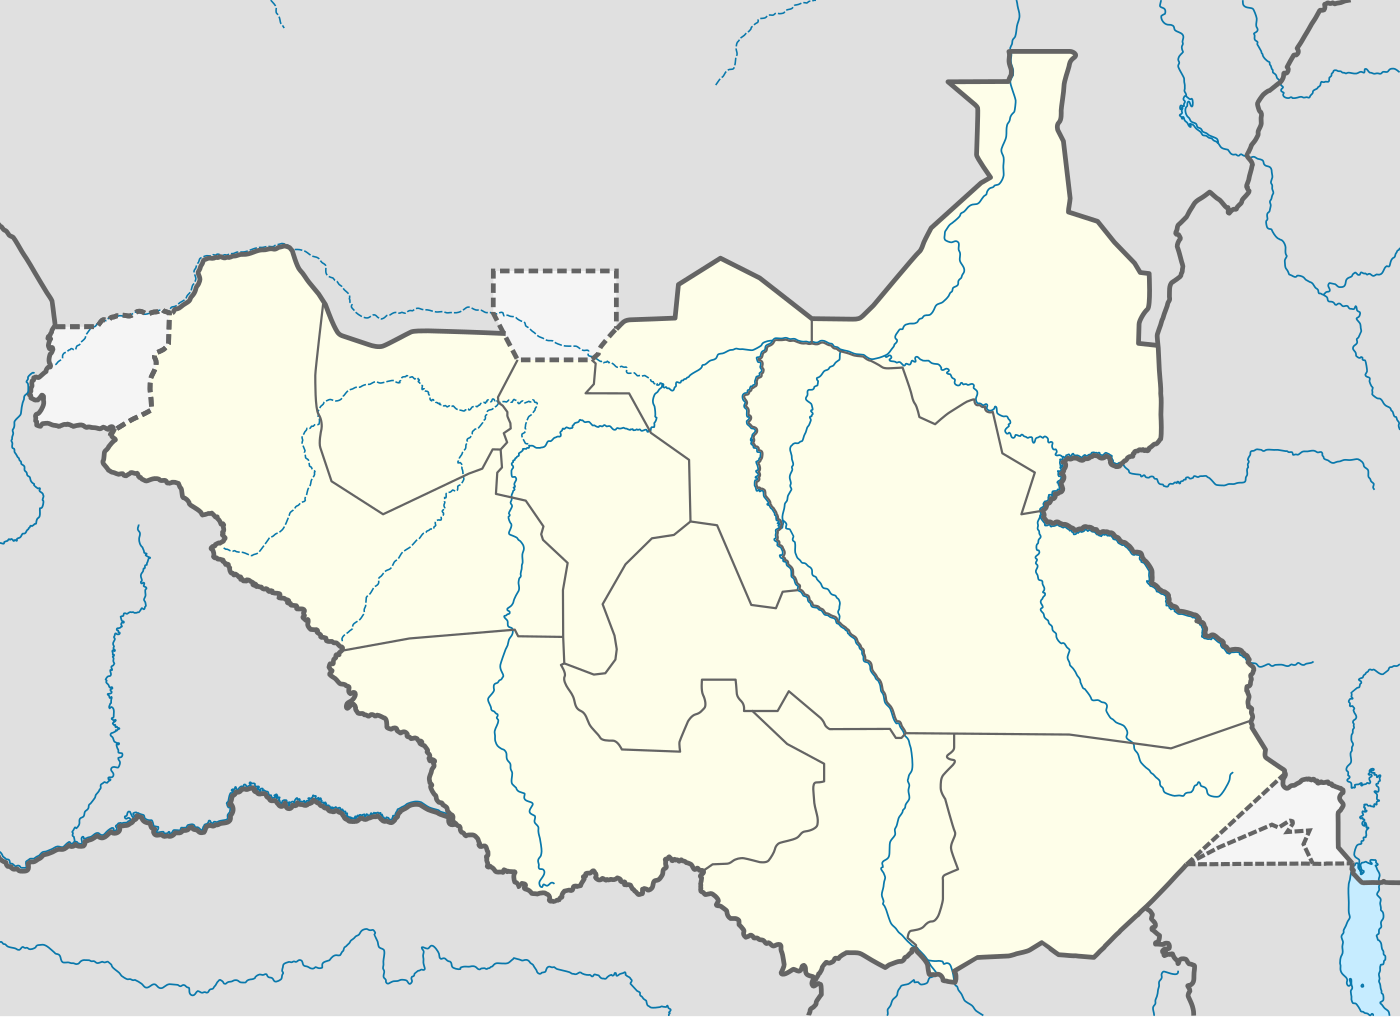 Rogal Dorm/South Sudanese detailed map is located in South Sudan